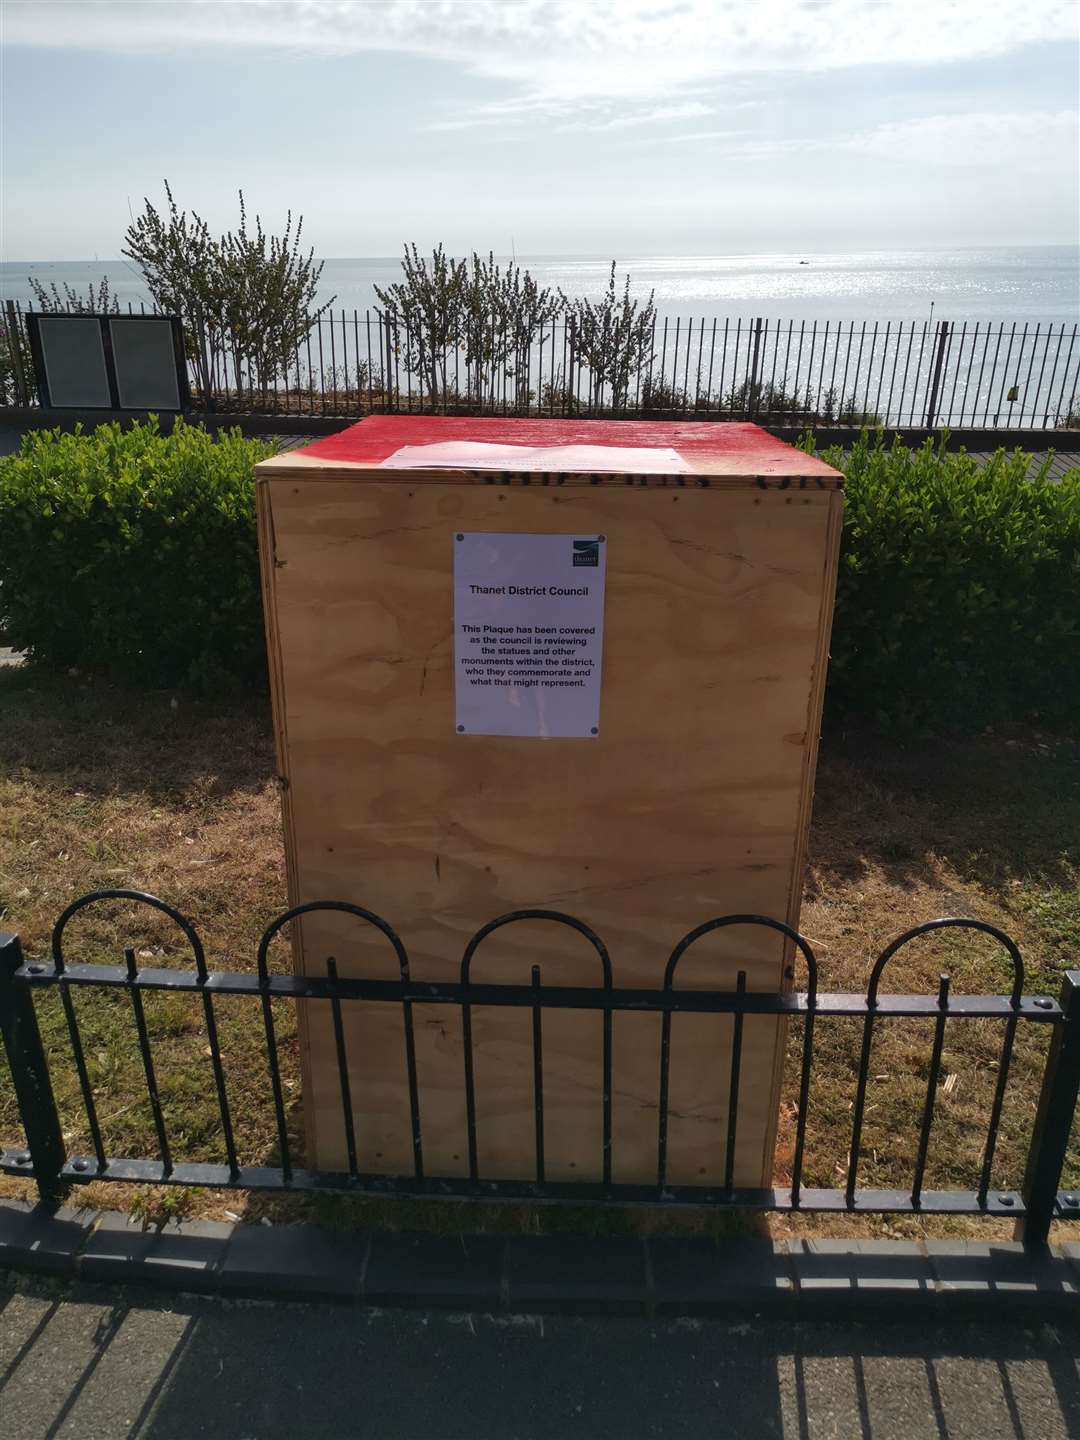 The plaque was covered by Thanet council while a review took place on whether it should stay